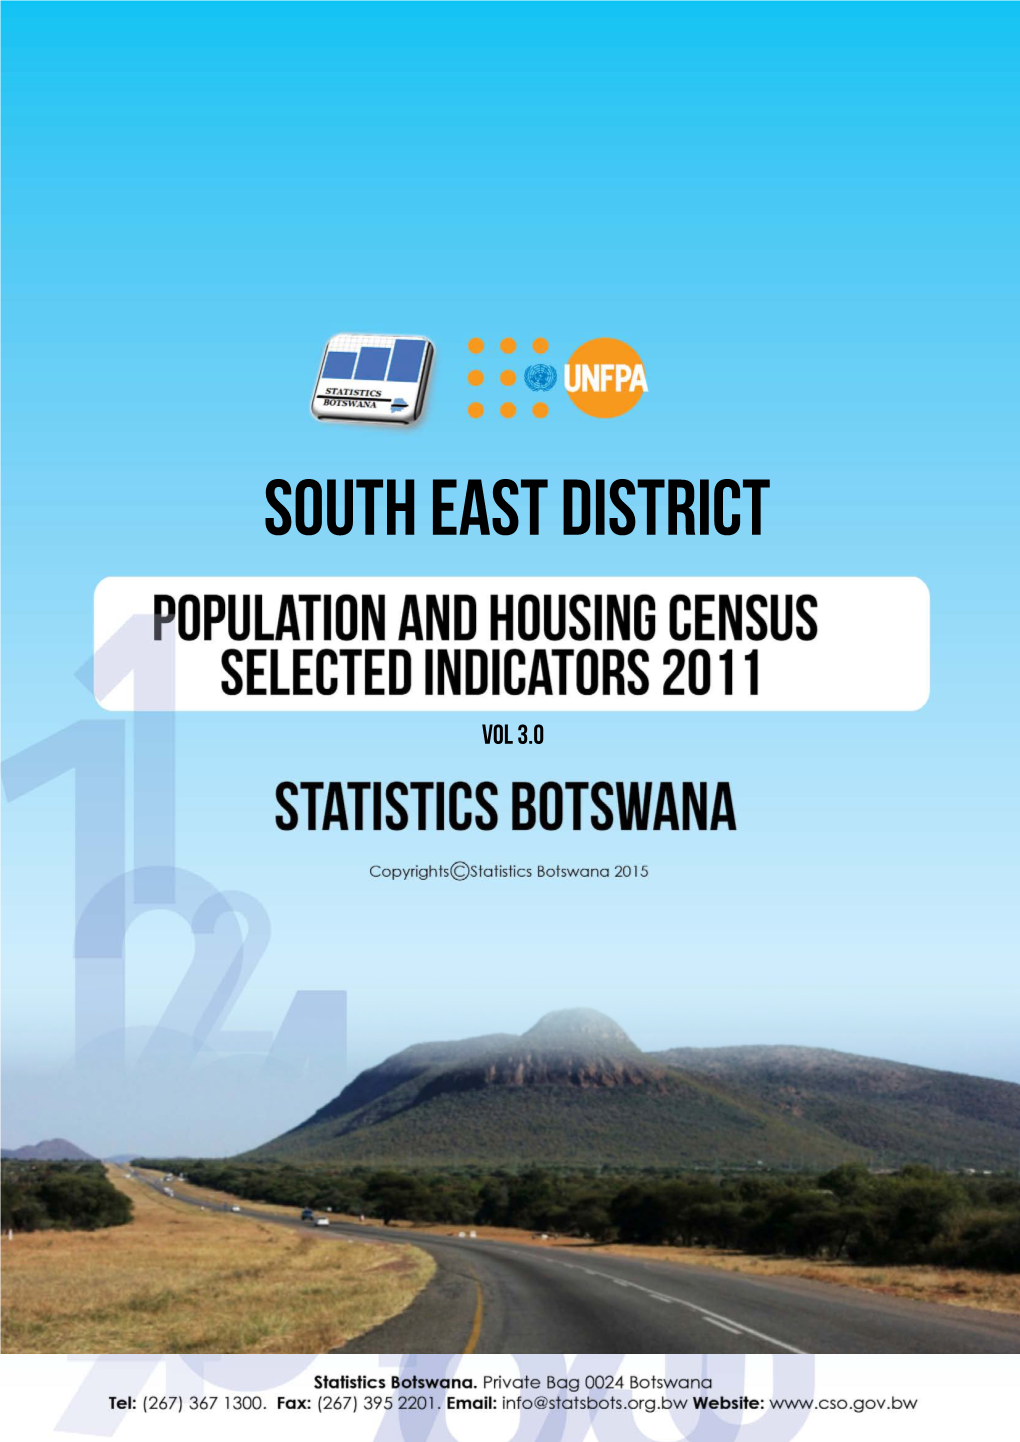 South East District-Population and Housing Census 2011 Selected